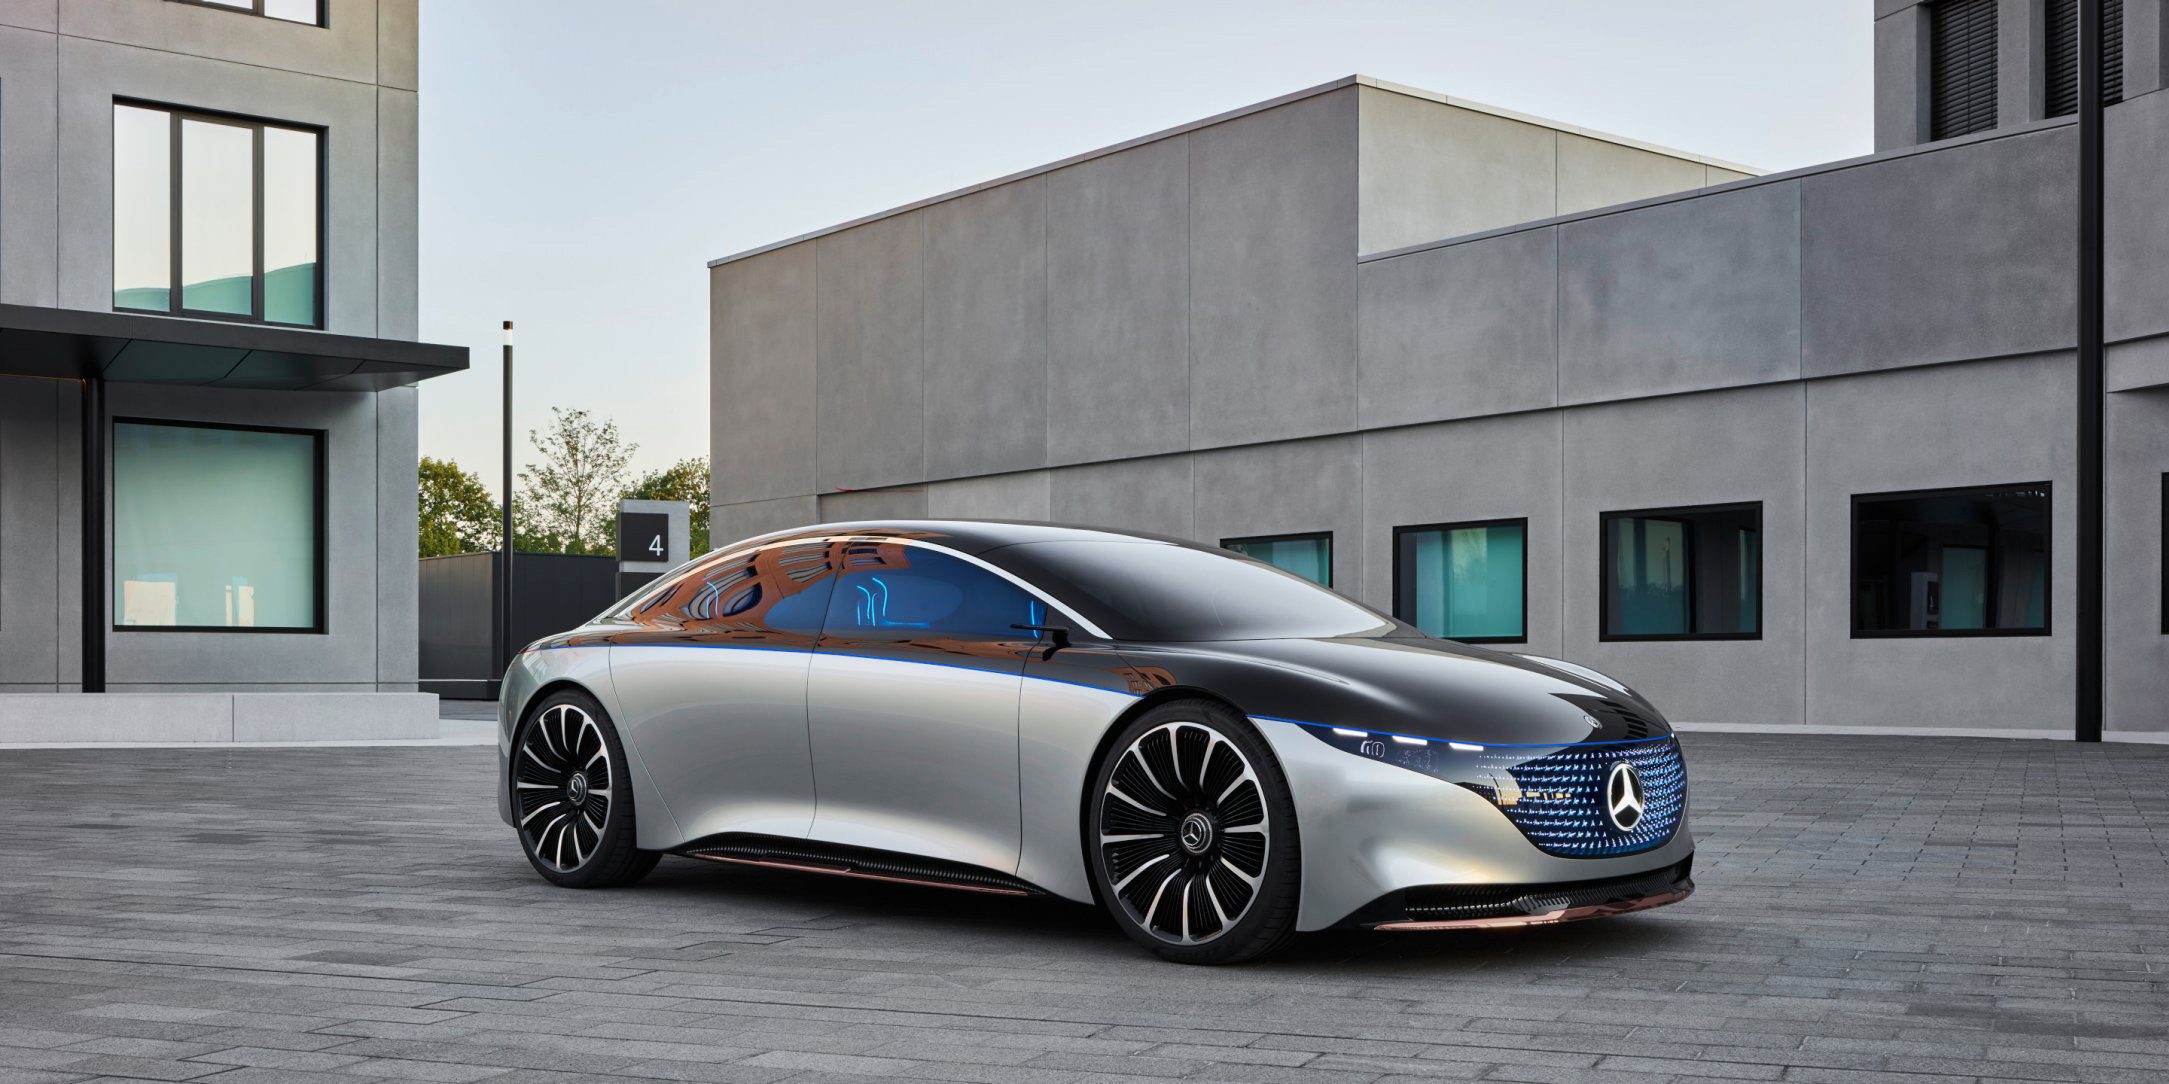 Here comes Mercedes EQS electric sedan, as company makes a run at Tesla - deals in retail